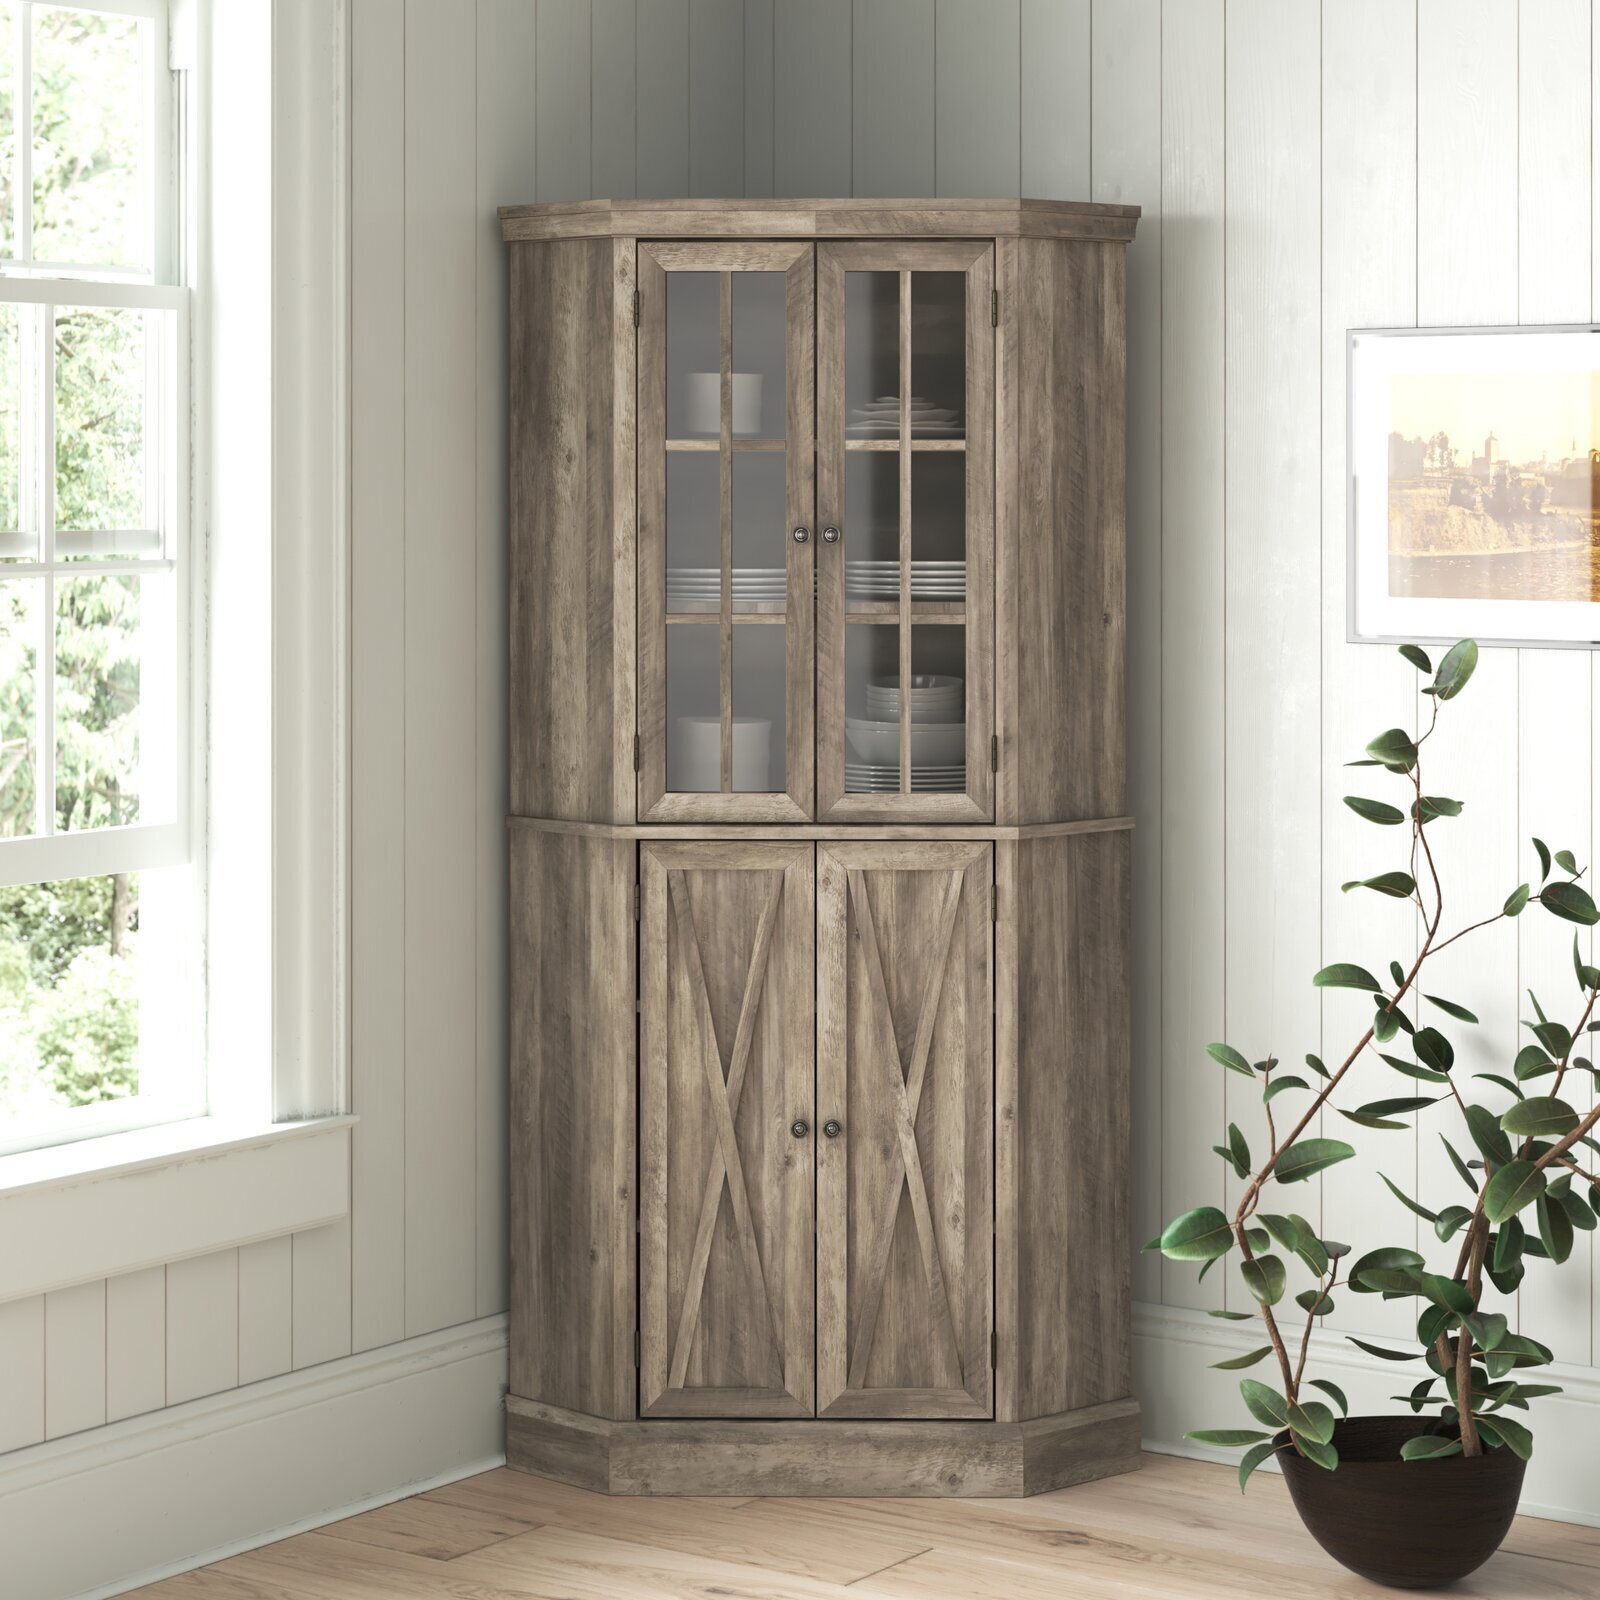 China cabinet with farmhouse charm